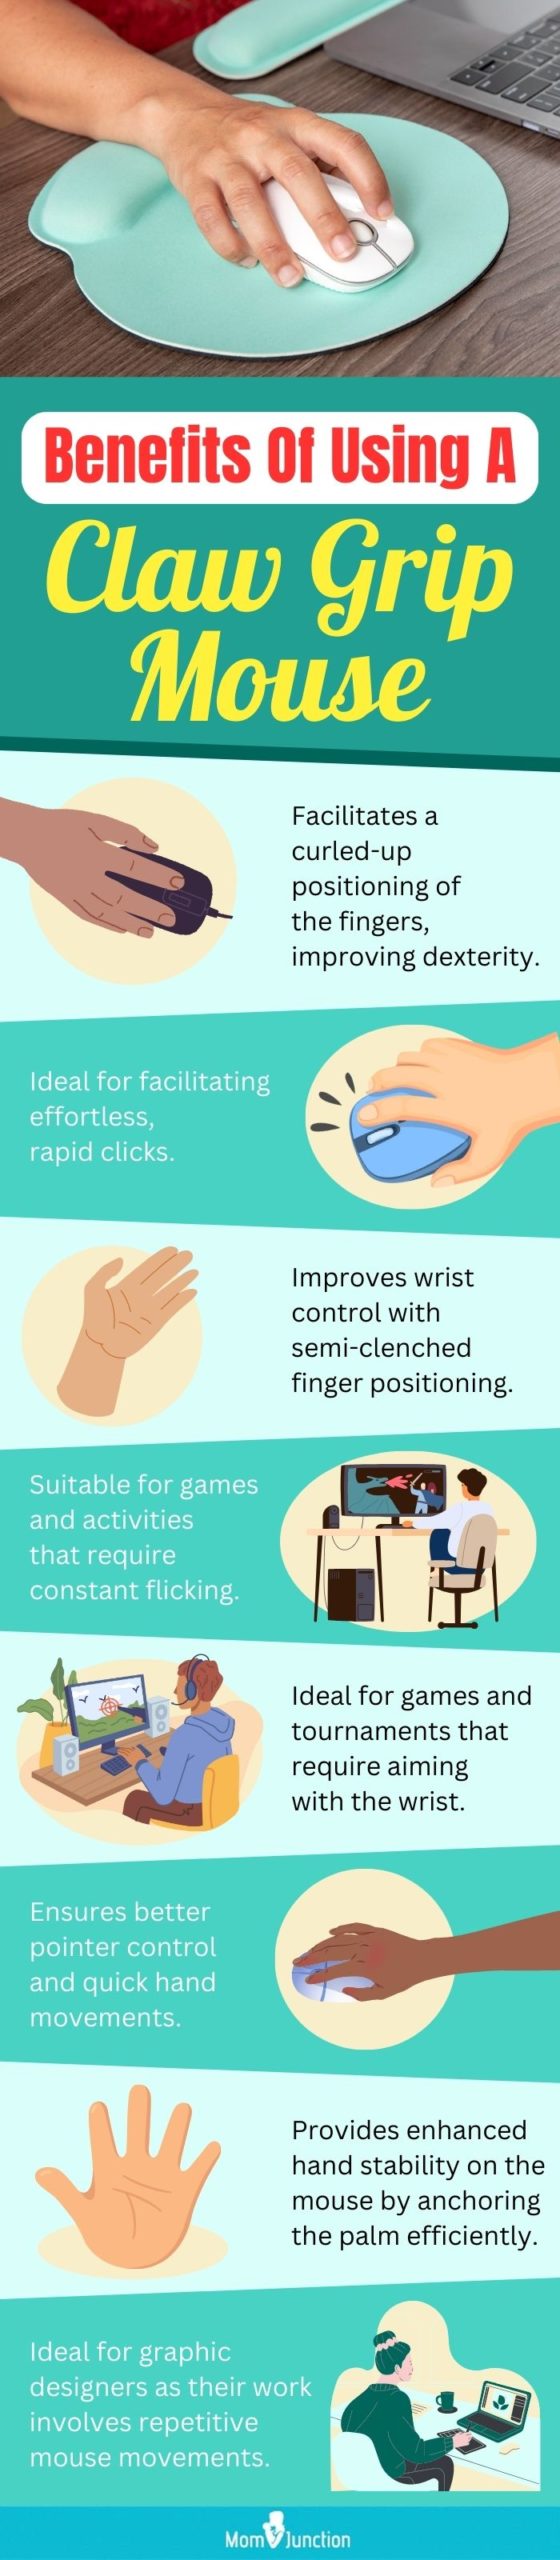 Benefits Of Using A Claw Grip Mouse (infographic)